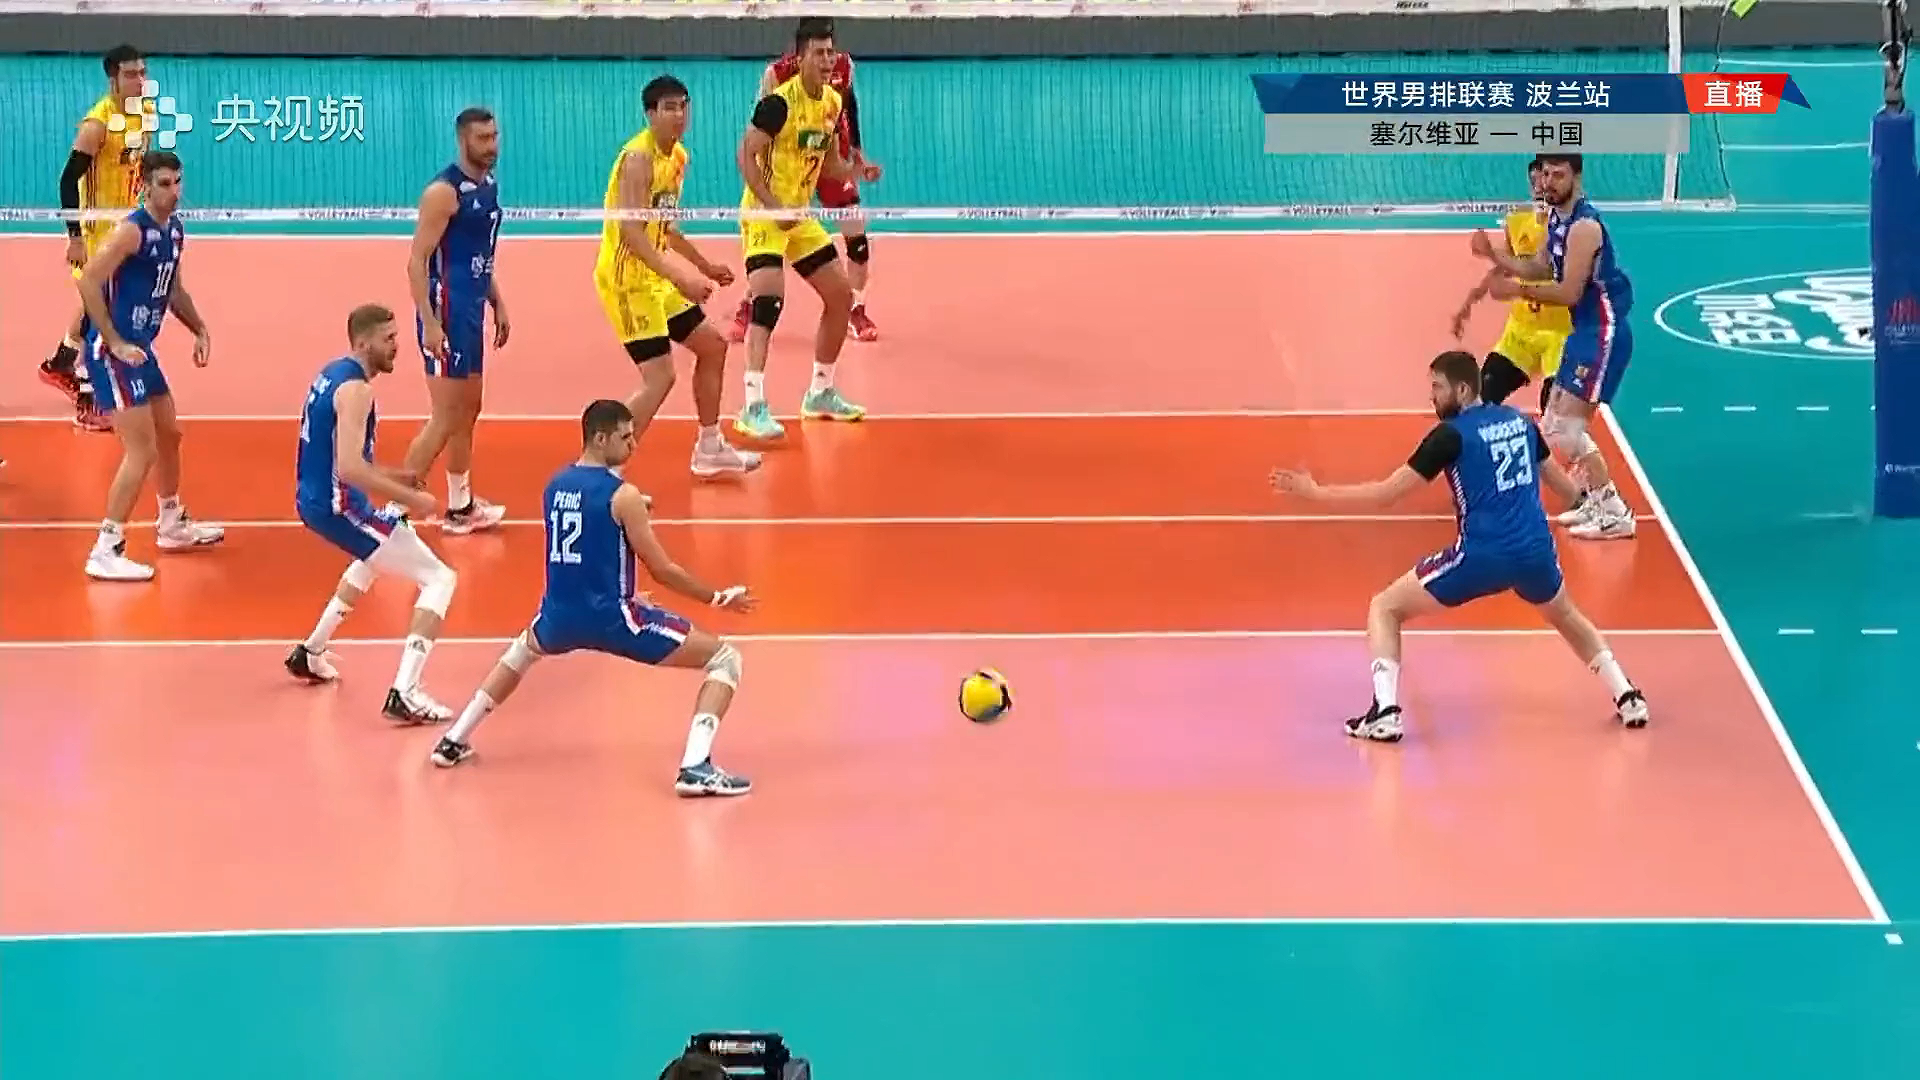 CCTV5 Volleyball Nations League 2022 China VS Serbia 20220710 CN 1080p HDTV H.264 AAC NoGroup.mp4 20 — Freeimage.host